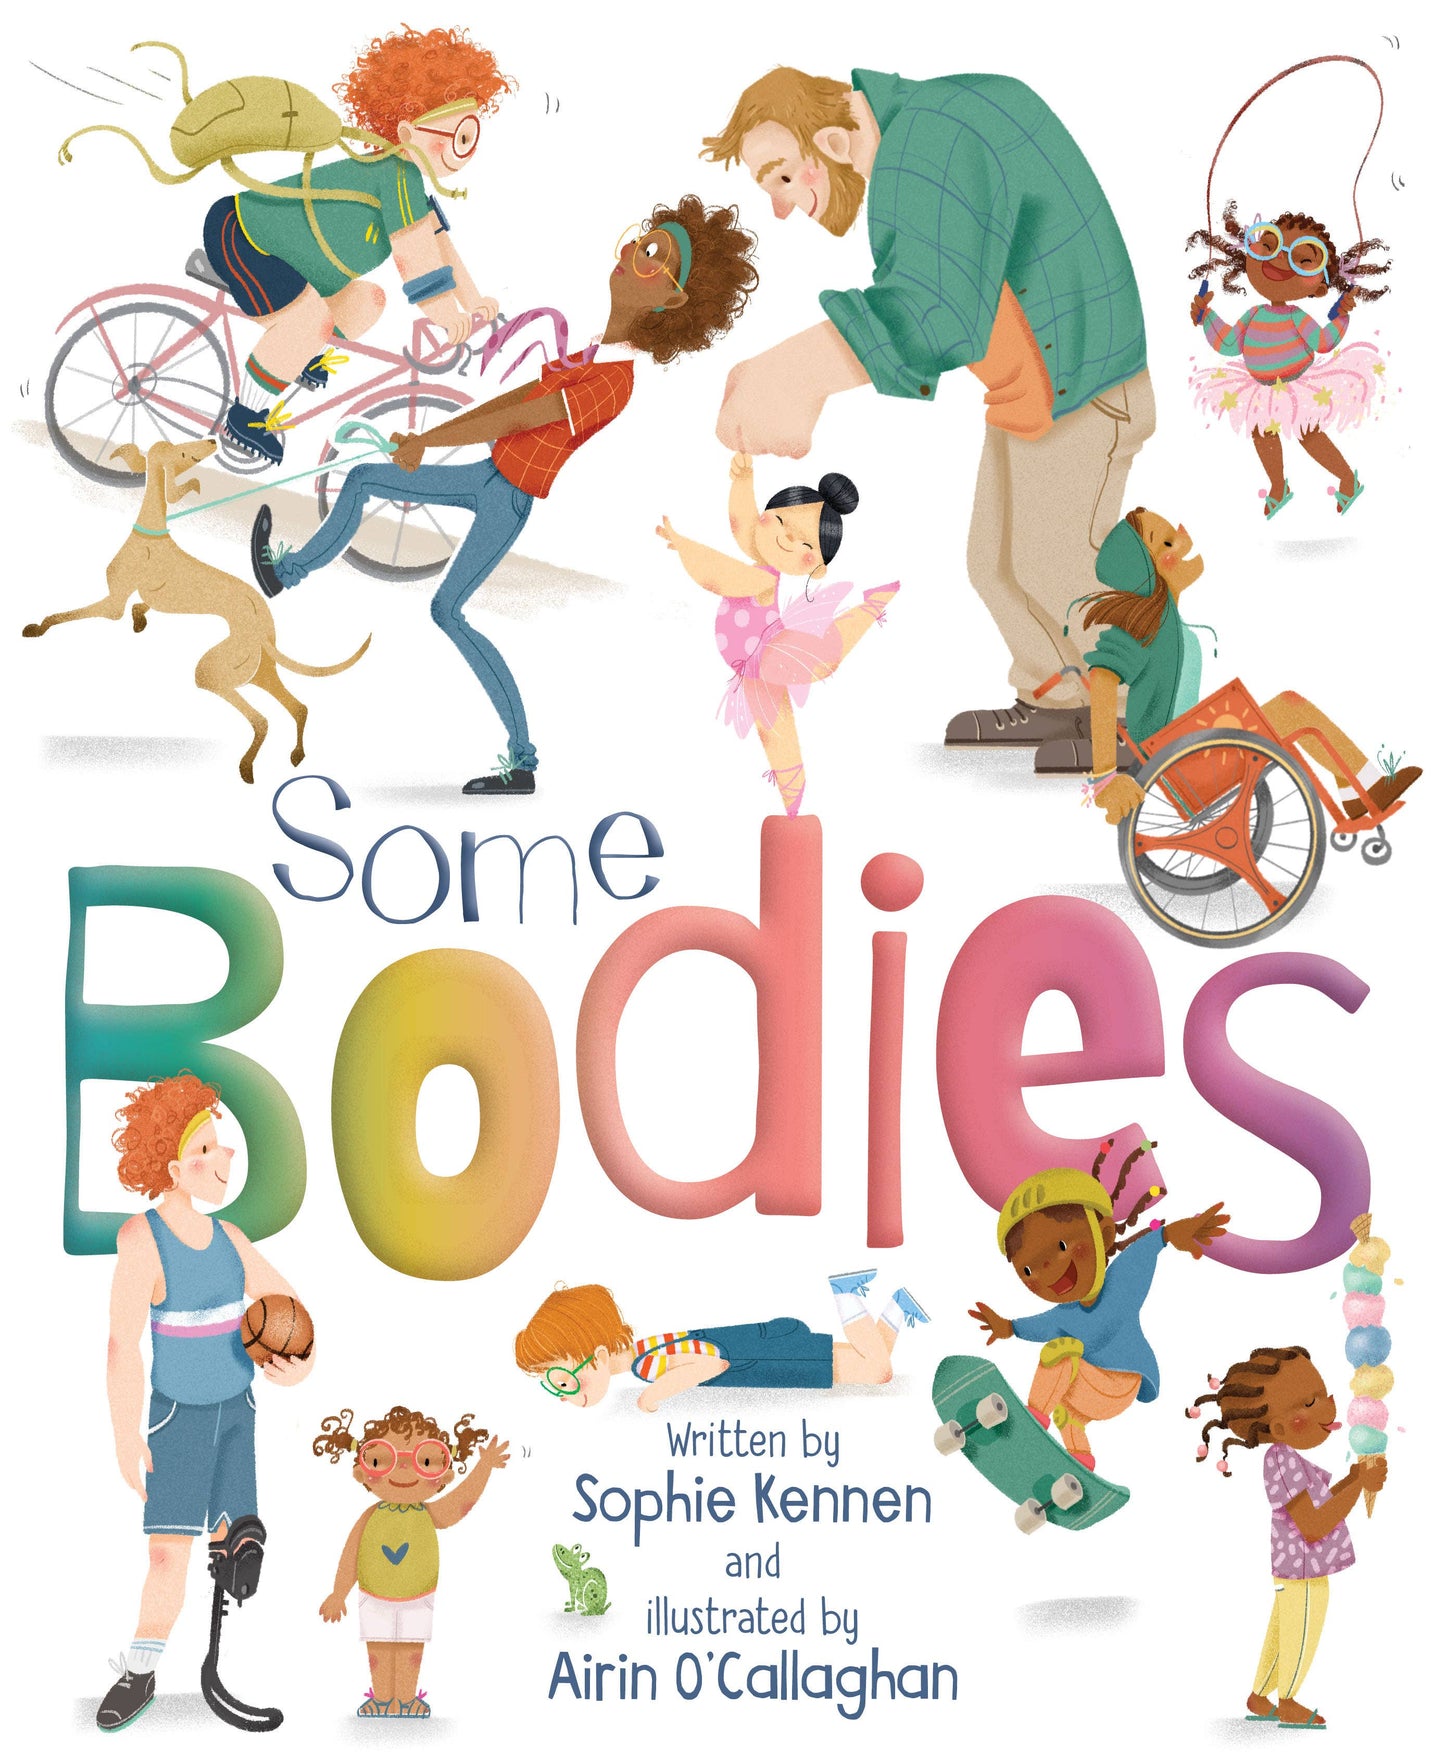 Some Bodies, a hardcover picture